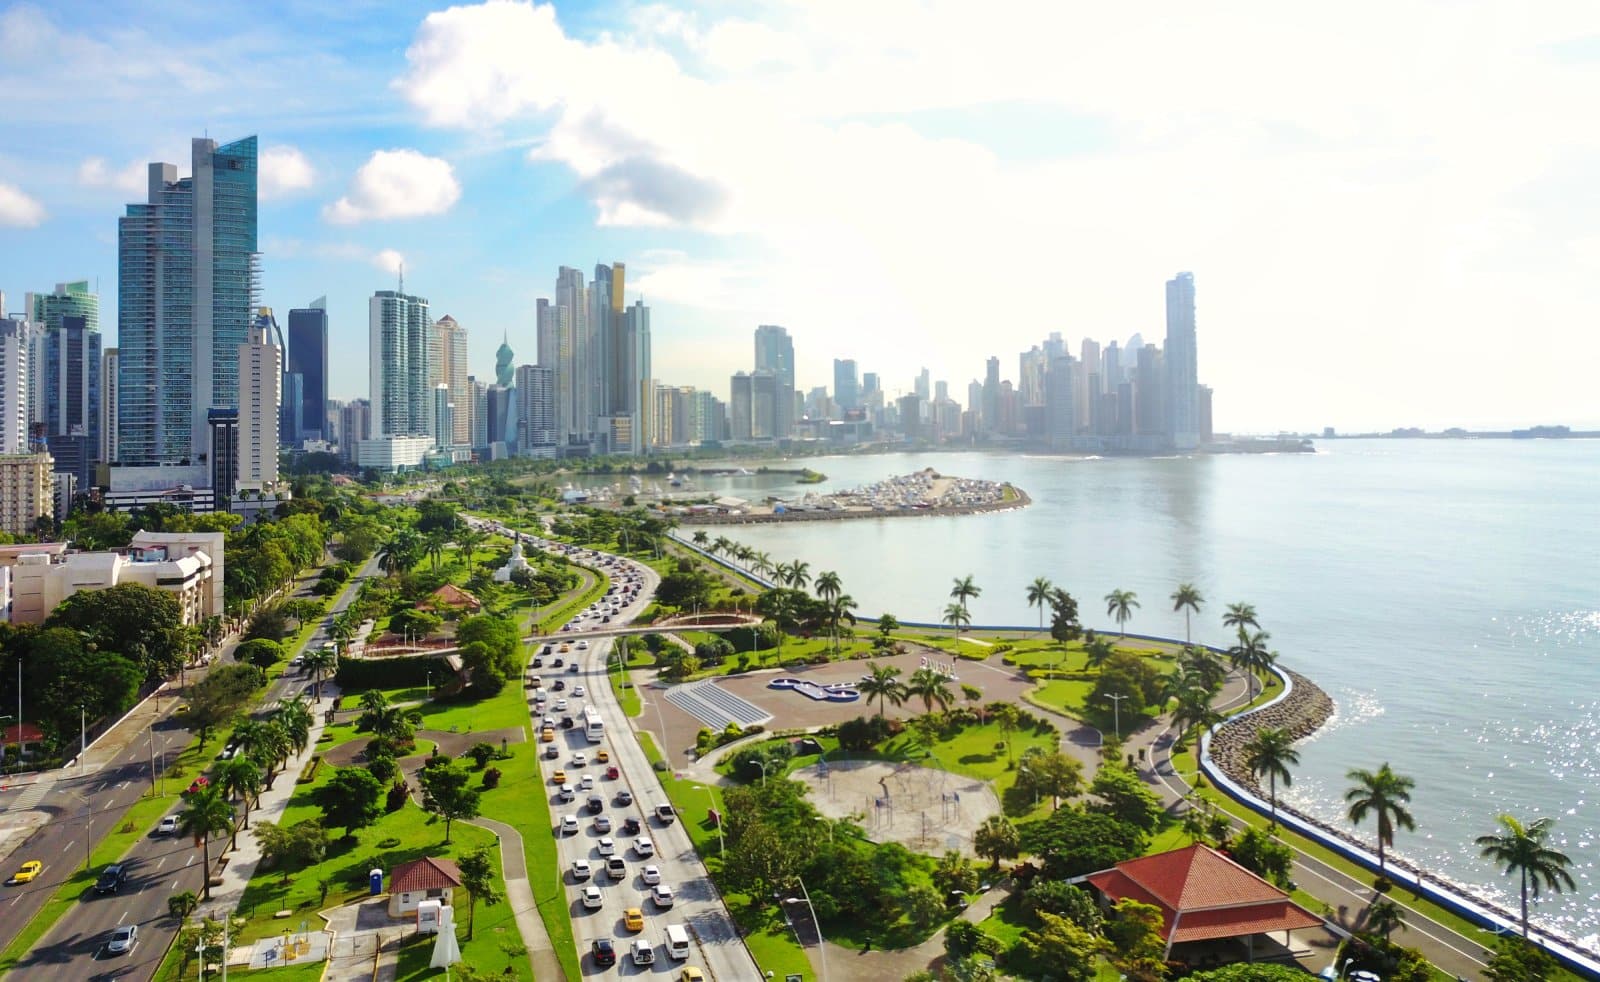 <p><span>With its lush landscapes and modern amenities, Panama’s Pensionado program provides a retiree-friendly visa alongside discounts on services, making it an attractive destination for a comfortable and affordable retirement.</span></p>